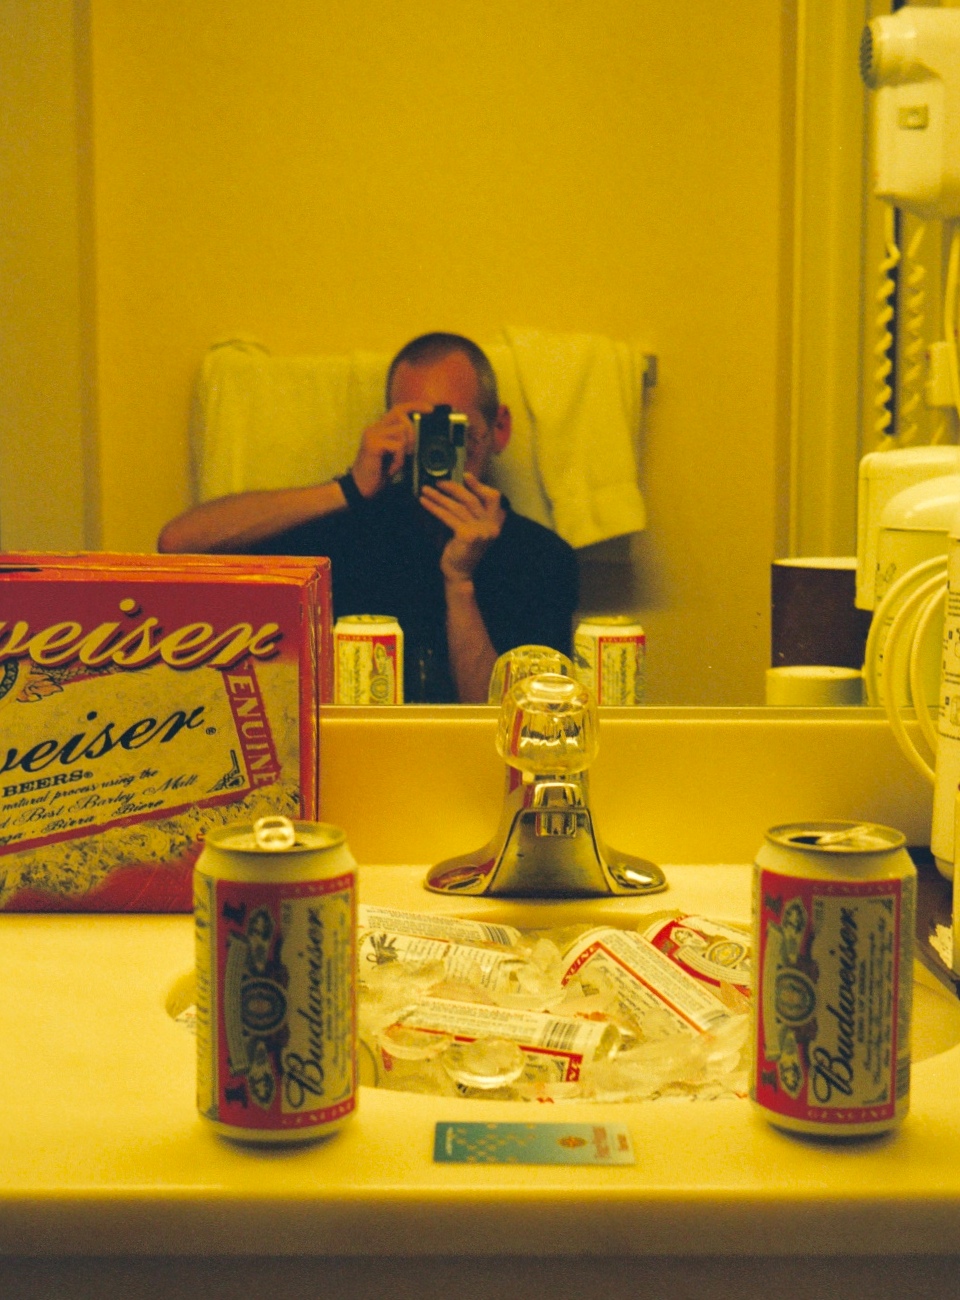 Self-portrait of Simon in a hotel room mirror, with the sink full of ice and cans of beer.